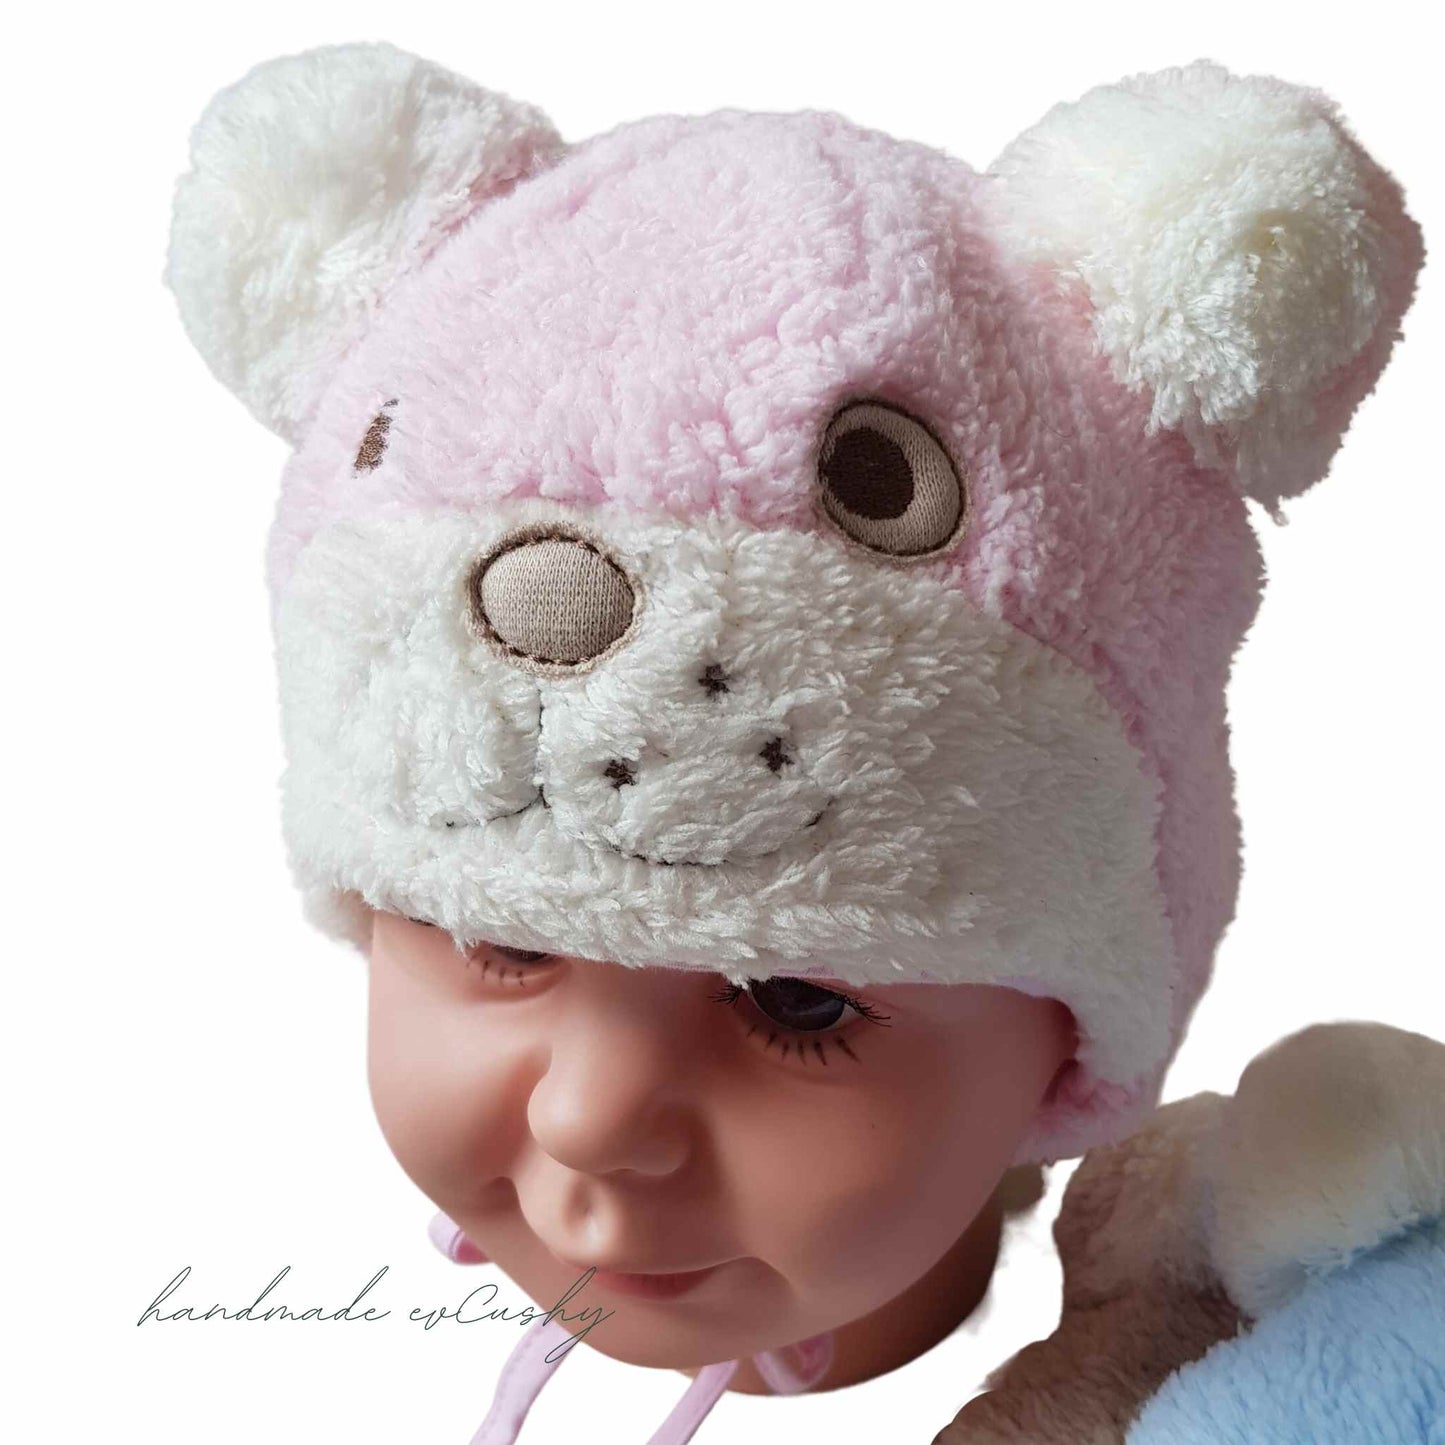 winter hats for babies pink teddy bear hat with pom-poms bonnet style evcushy